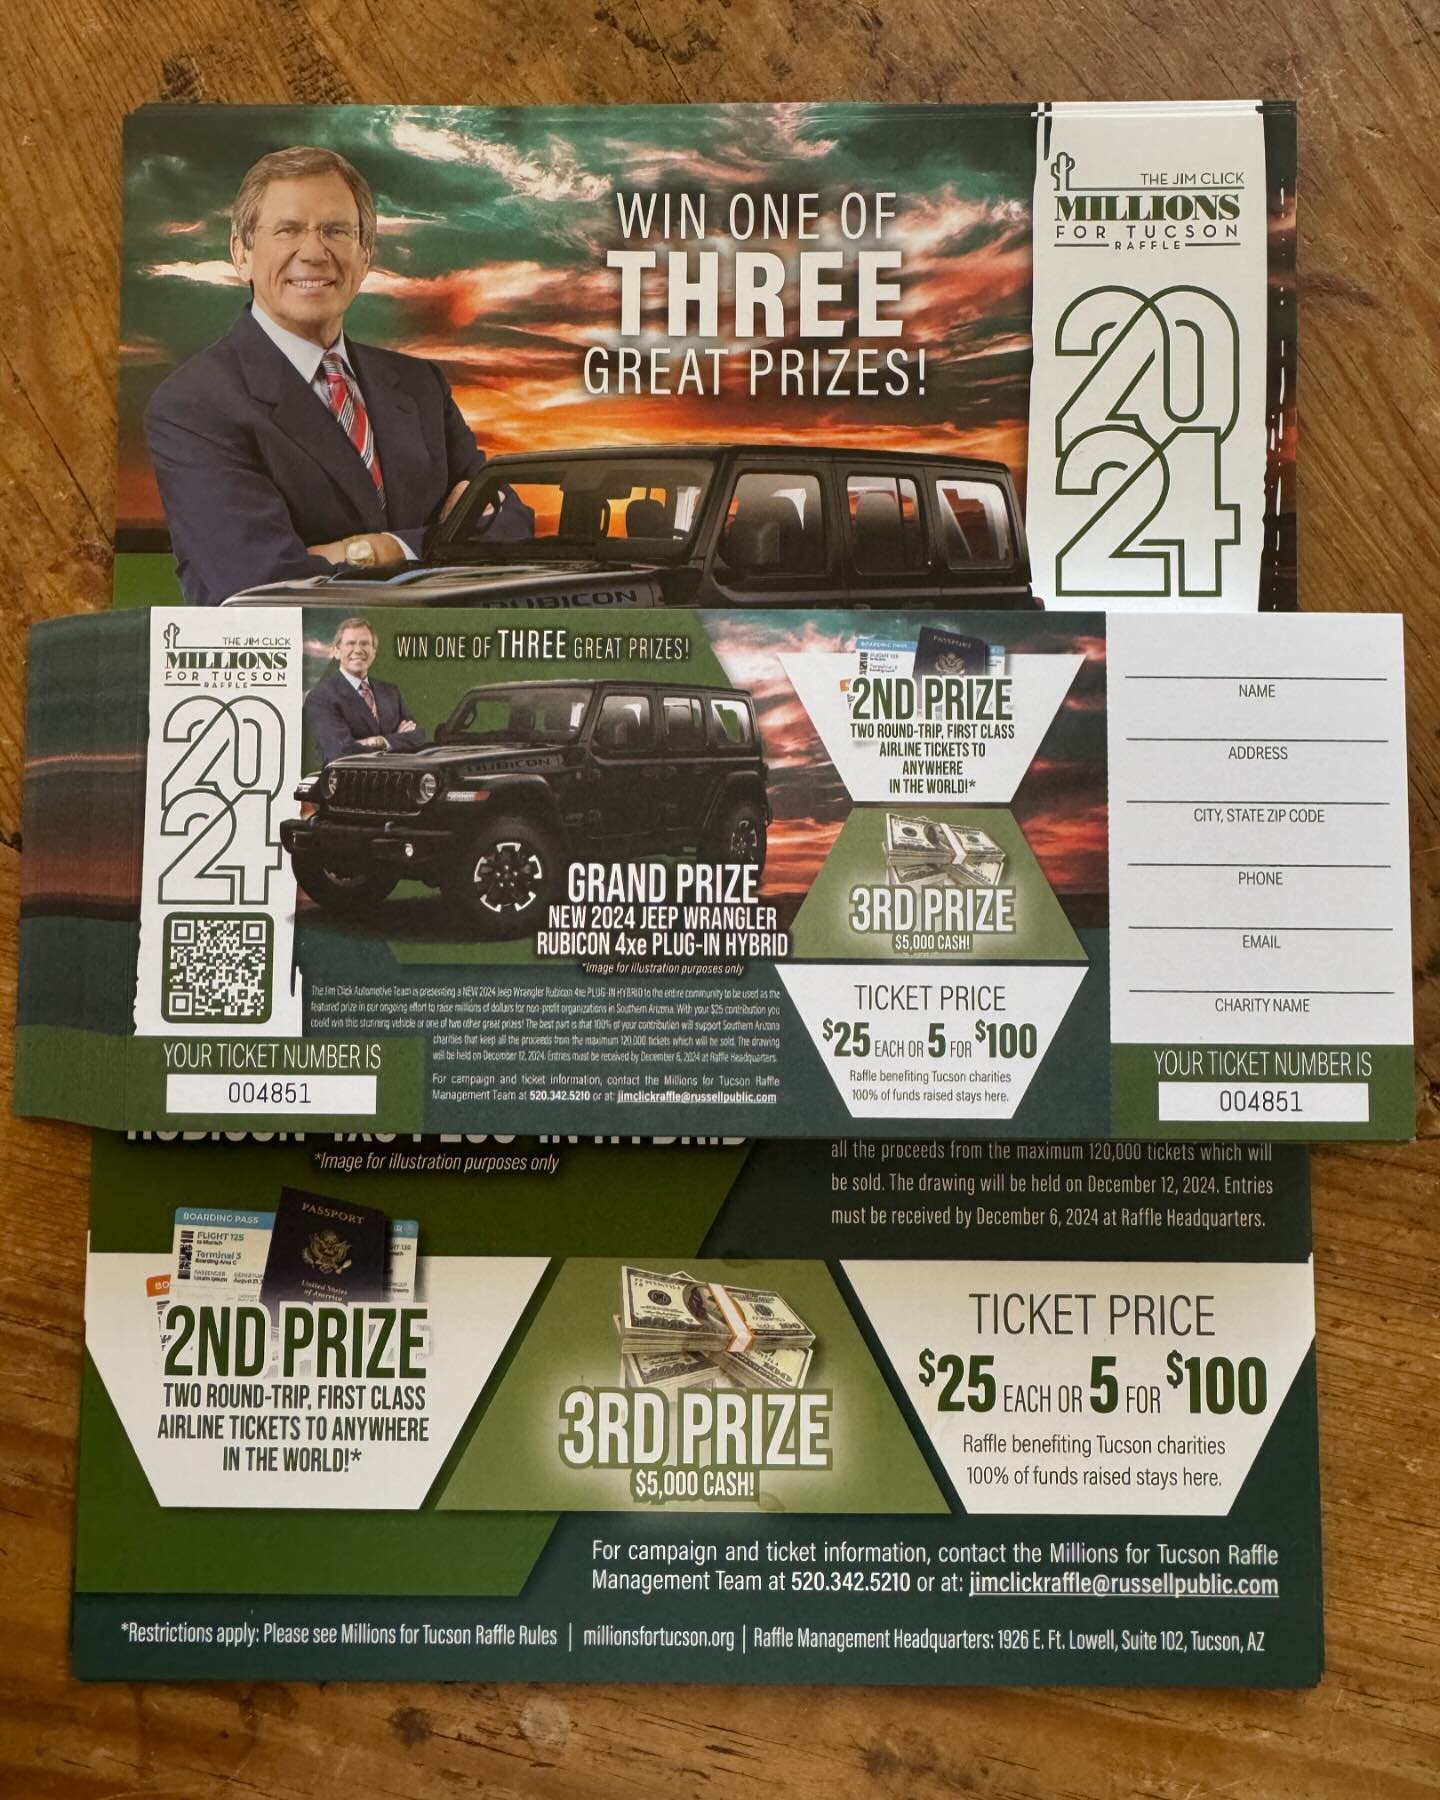 It&rsquo;s raffle time! This year @jim_click_automotive has a grand prize of a 2024 Jeep Wrangler Rubicon 4xe Plug-In Hybrid, second place is two round trip tickets first class plane tickets ANYWHERE, and third place is $5000 cash😦

Tickets are $25 